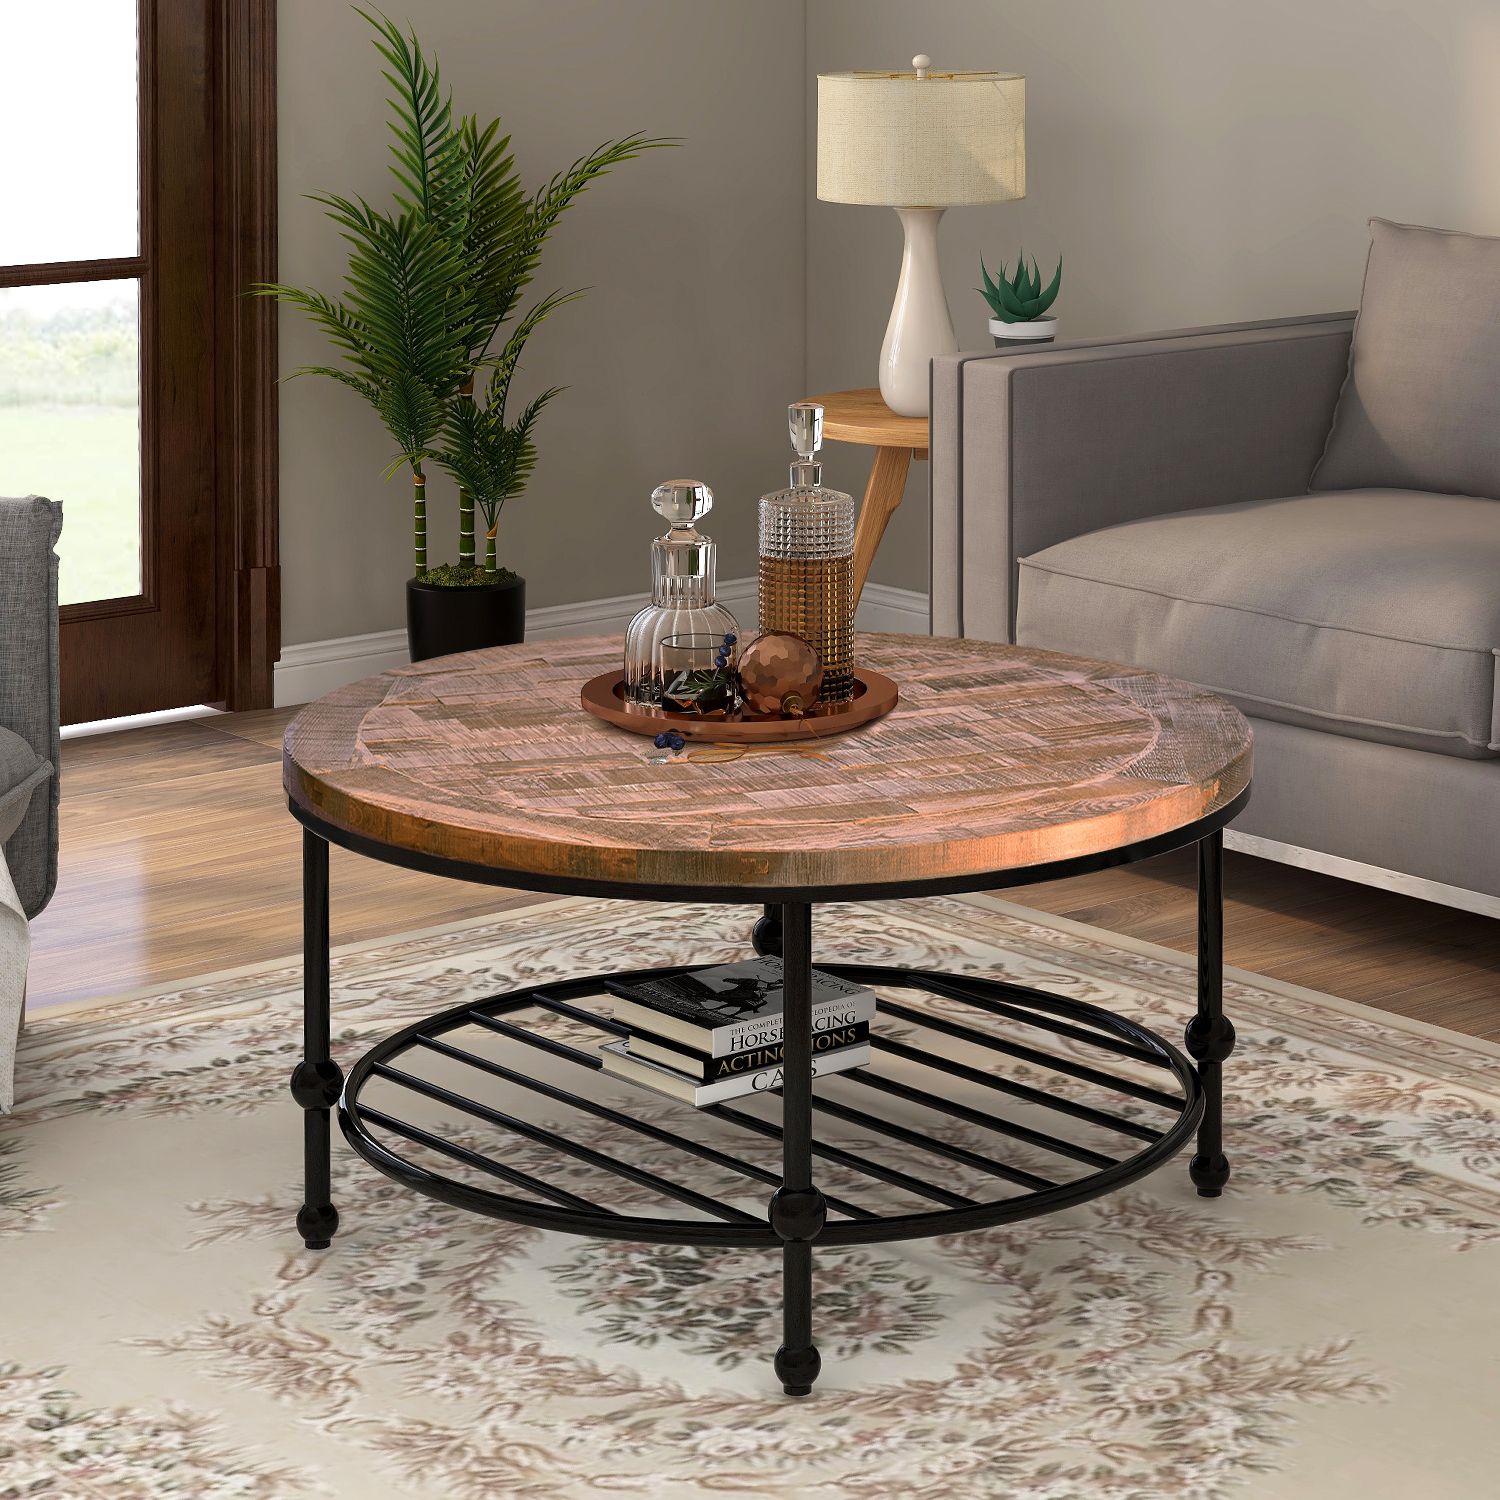 Round Coffee Table, Farmhouse Coffee Table, Rustic Brown Pertaining To 2 Piece Round Coffee Tables Set (View 1 of 15)